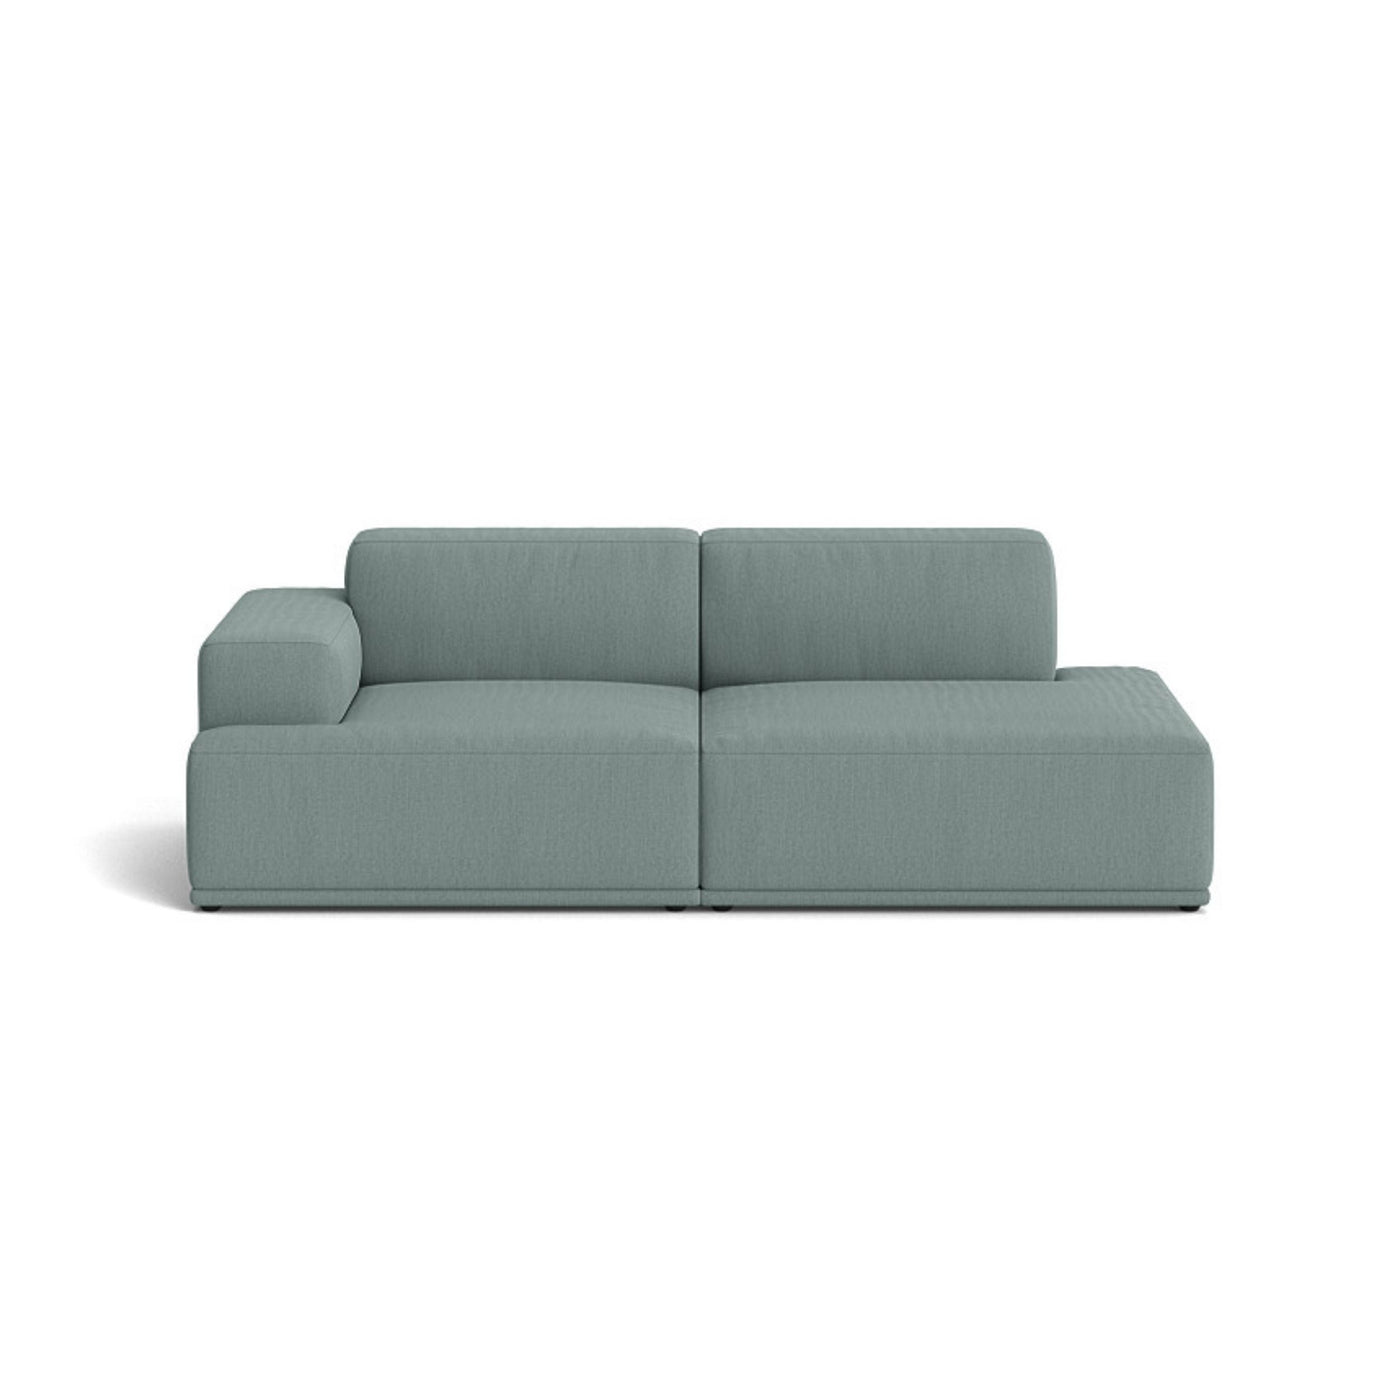 Muuto Connect Soft Modular 2 Seater Sofa, configuration 2. made-to-order from someday designs. #colour_re-wool-868